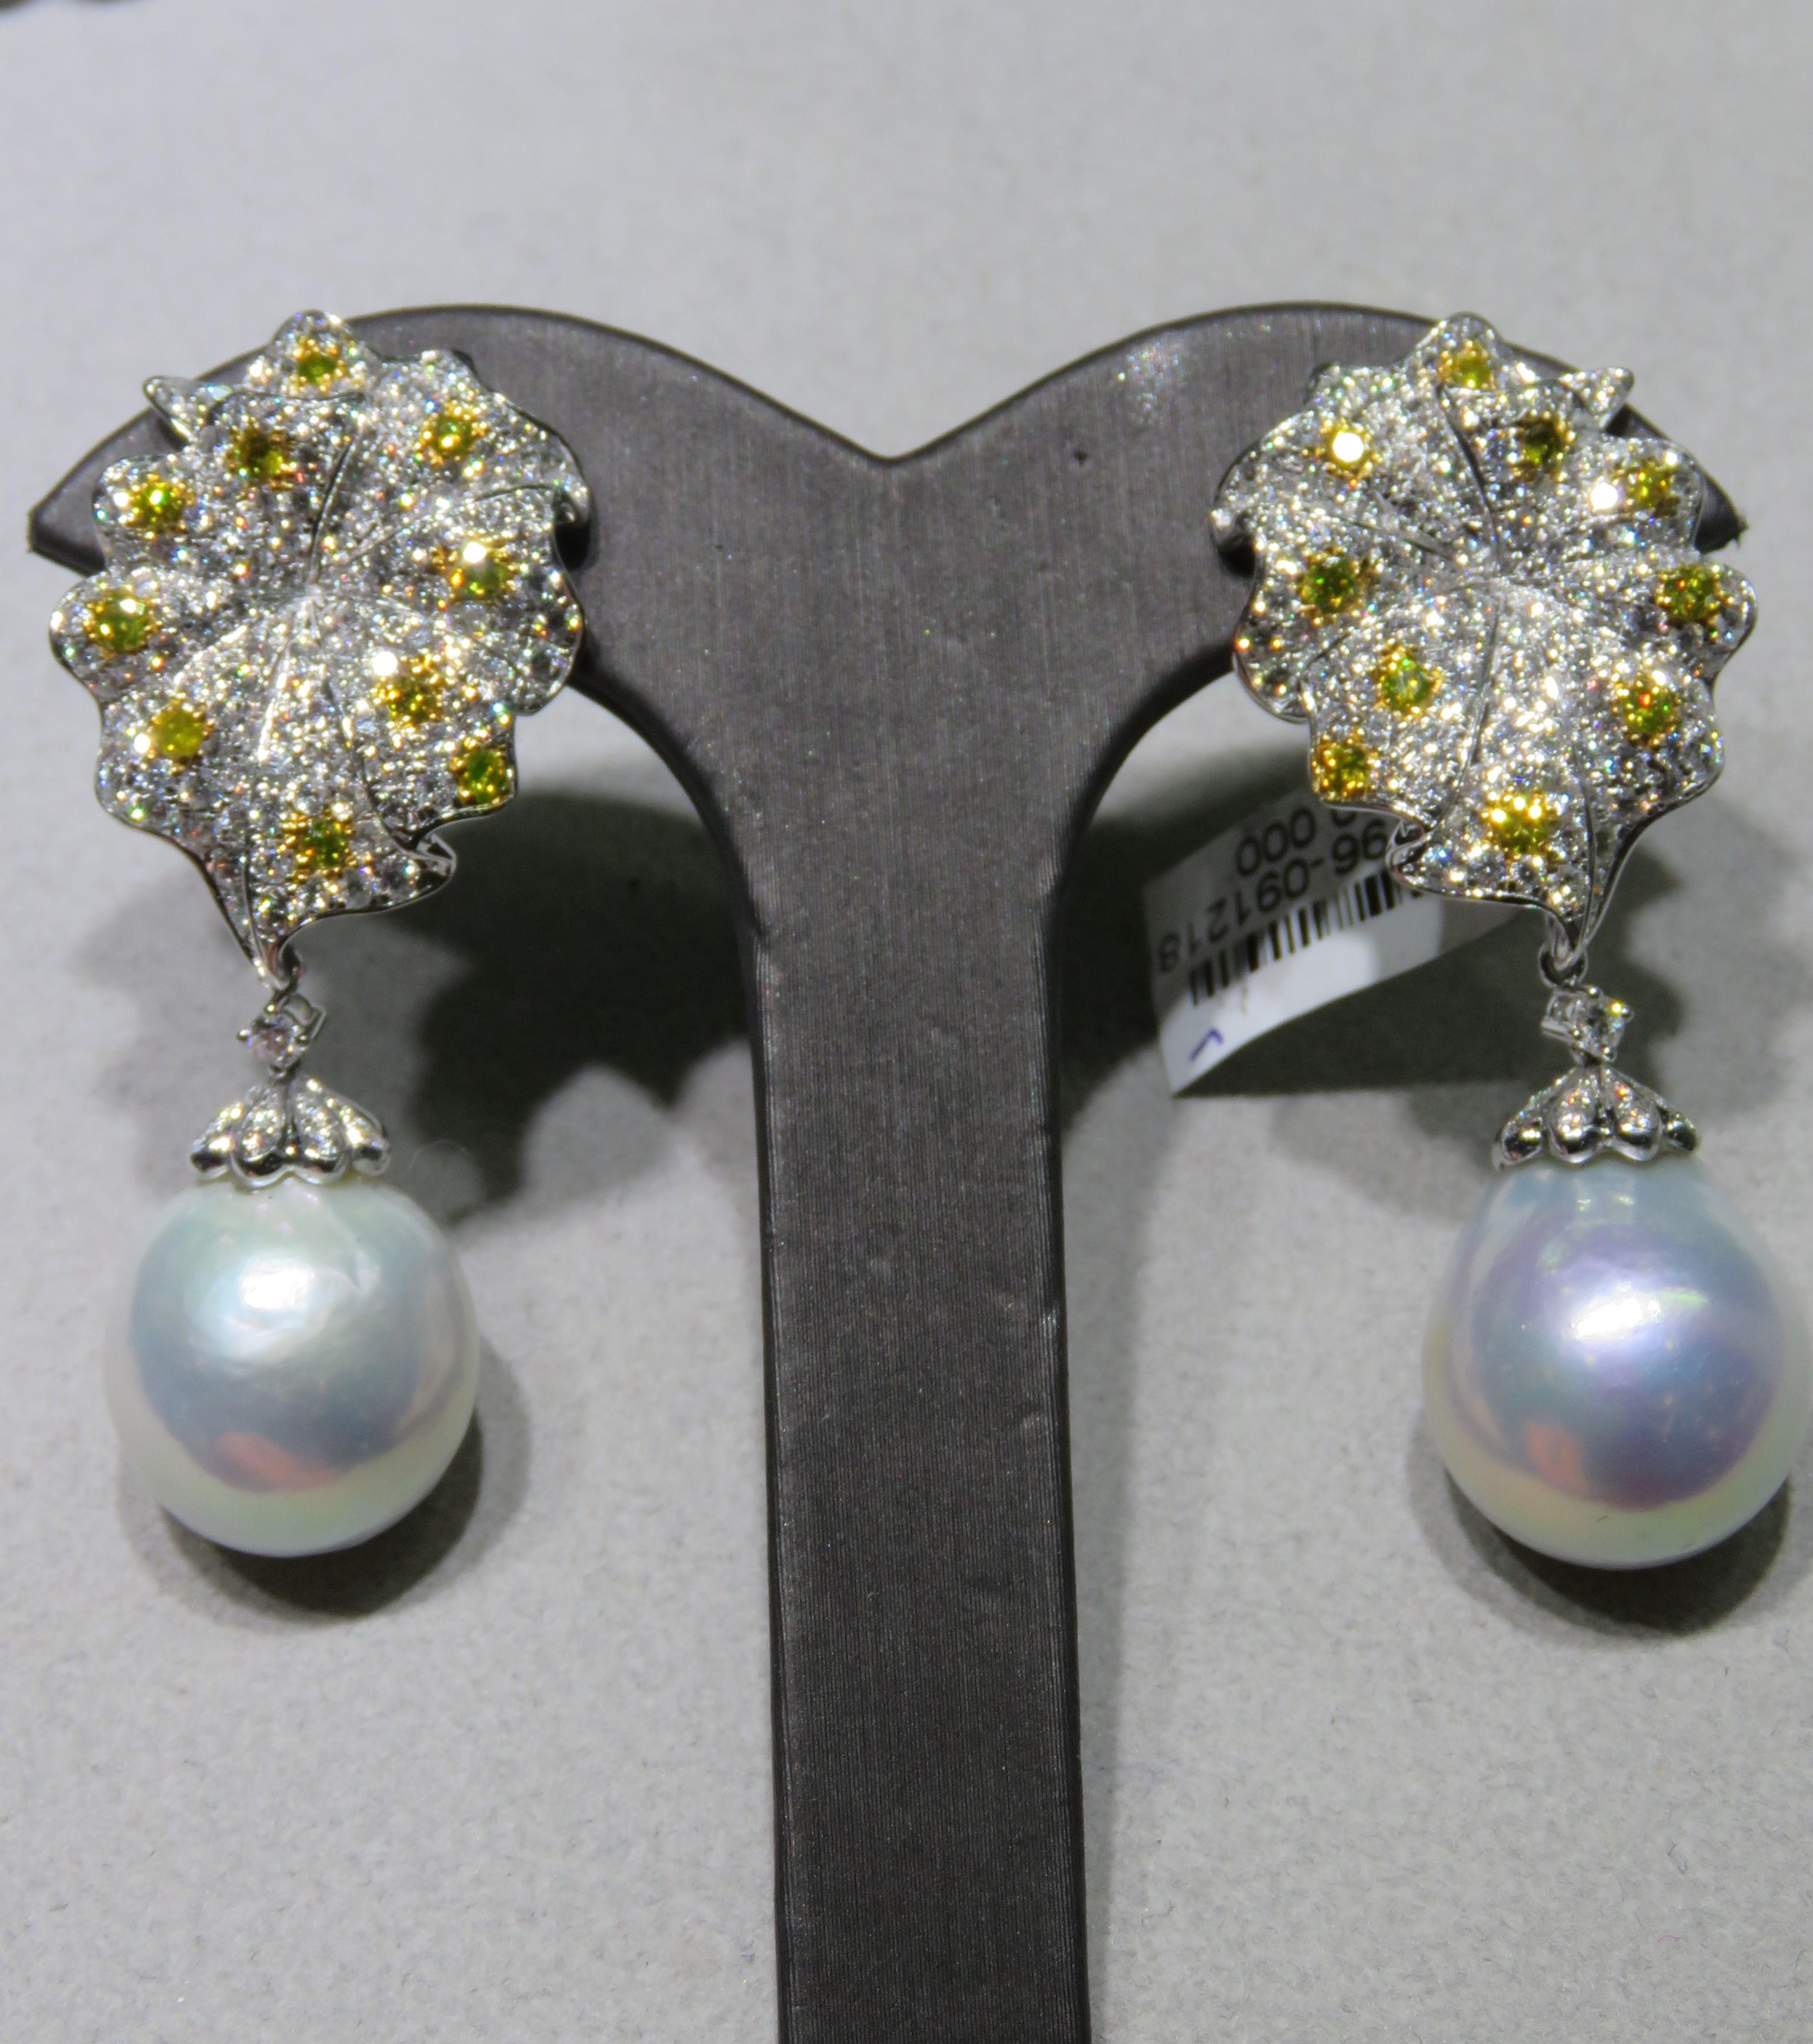 The Following Item we are offering are these Extremely Rare Beautiful 18KT Gold Fine Large Fancy South Sea White Pearl, White Diamond, and Yellow Diamond Detachable Leaf Dangle Earrings. Each Earring features Gorgeous a Magnificent Fine Fancy Large